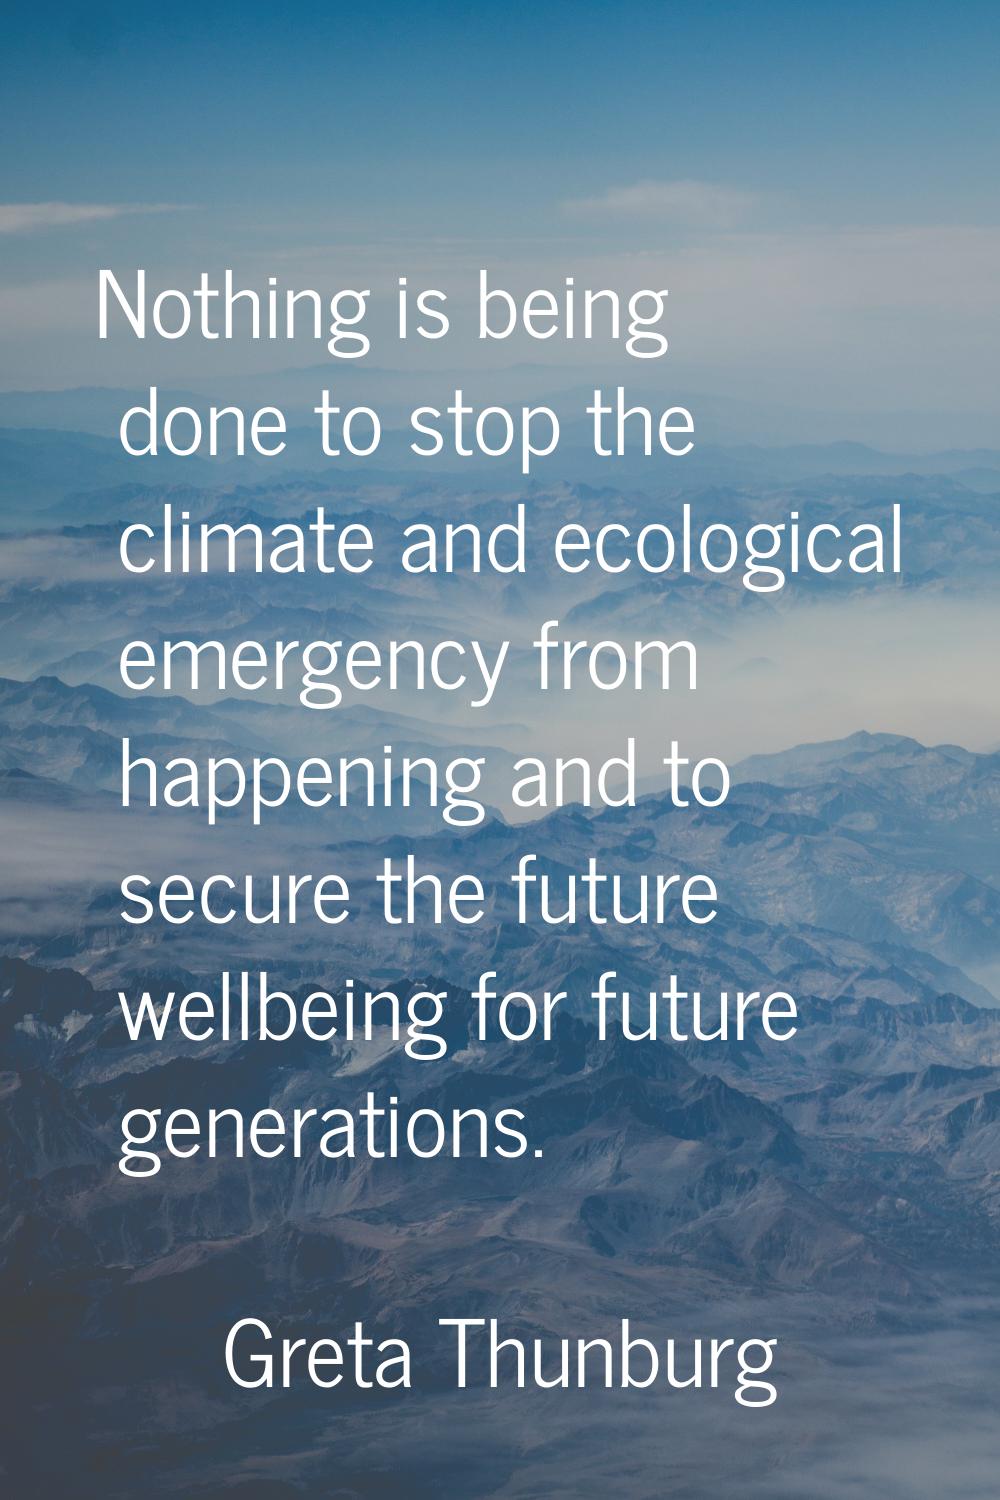 Nothing is being done to stop the climate and ecological emergency from happening and to secure the